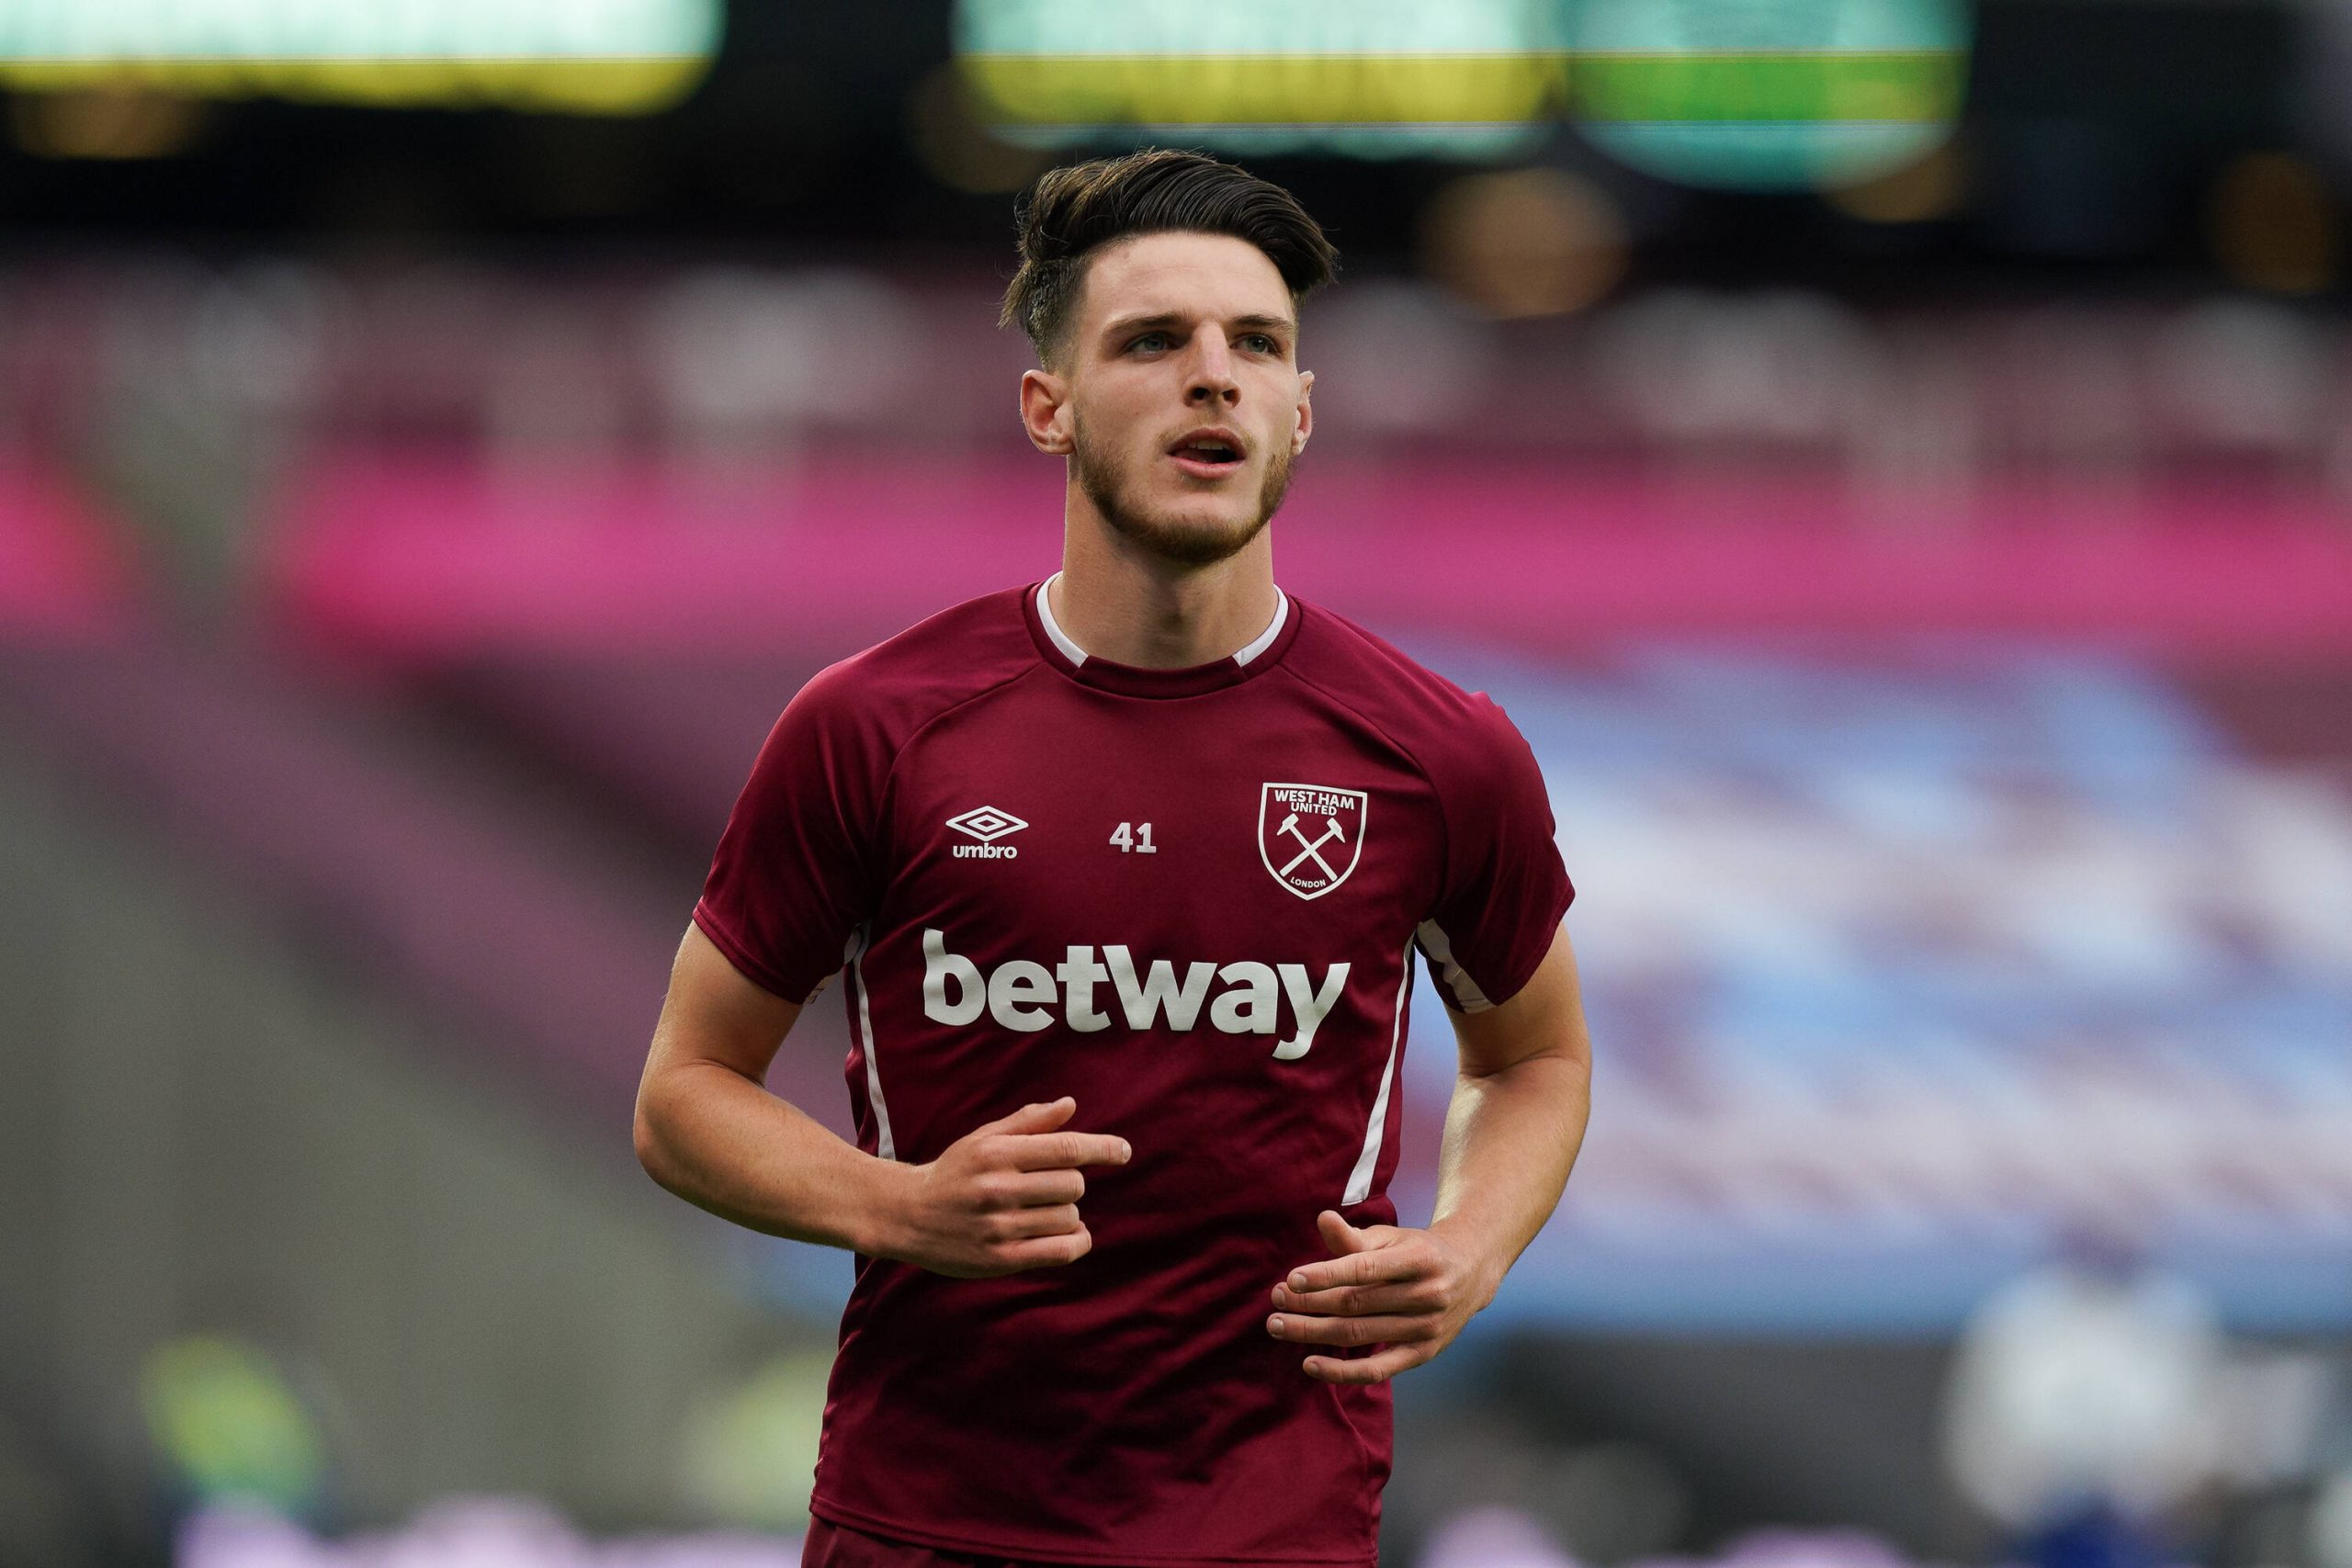 Chelsea have wanted to sign Declan Rice from West Ham United.